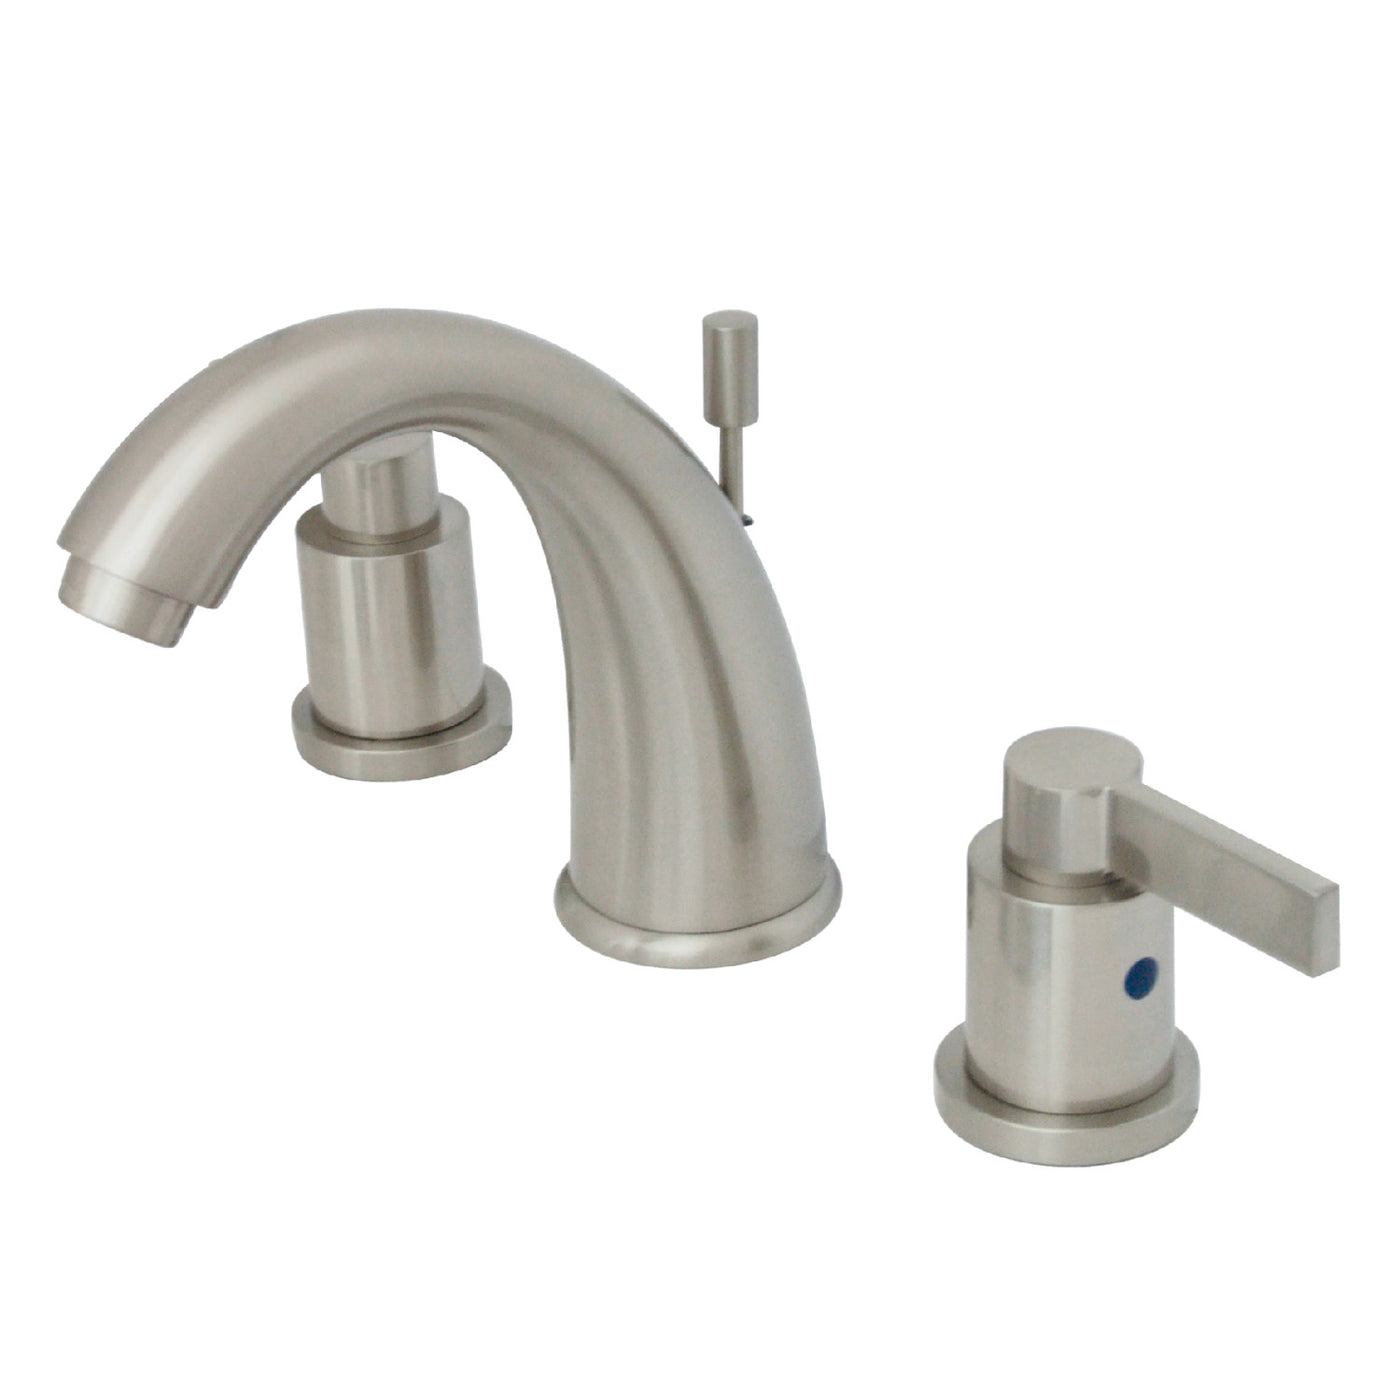 Elements of Design EB8988NDL Widespread Bathroom Faucet with Retail Pop-Up, Brushed Nickel